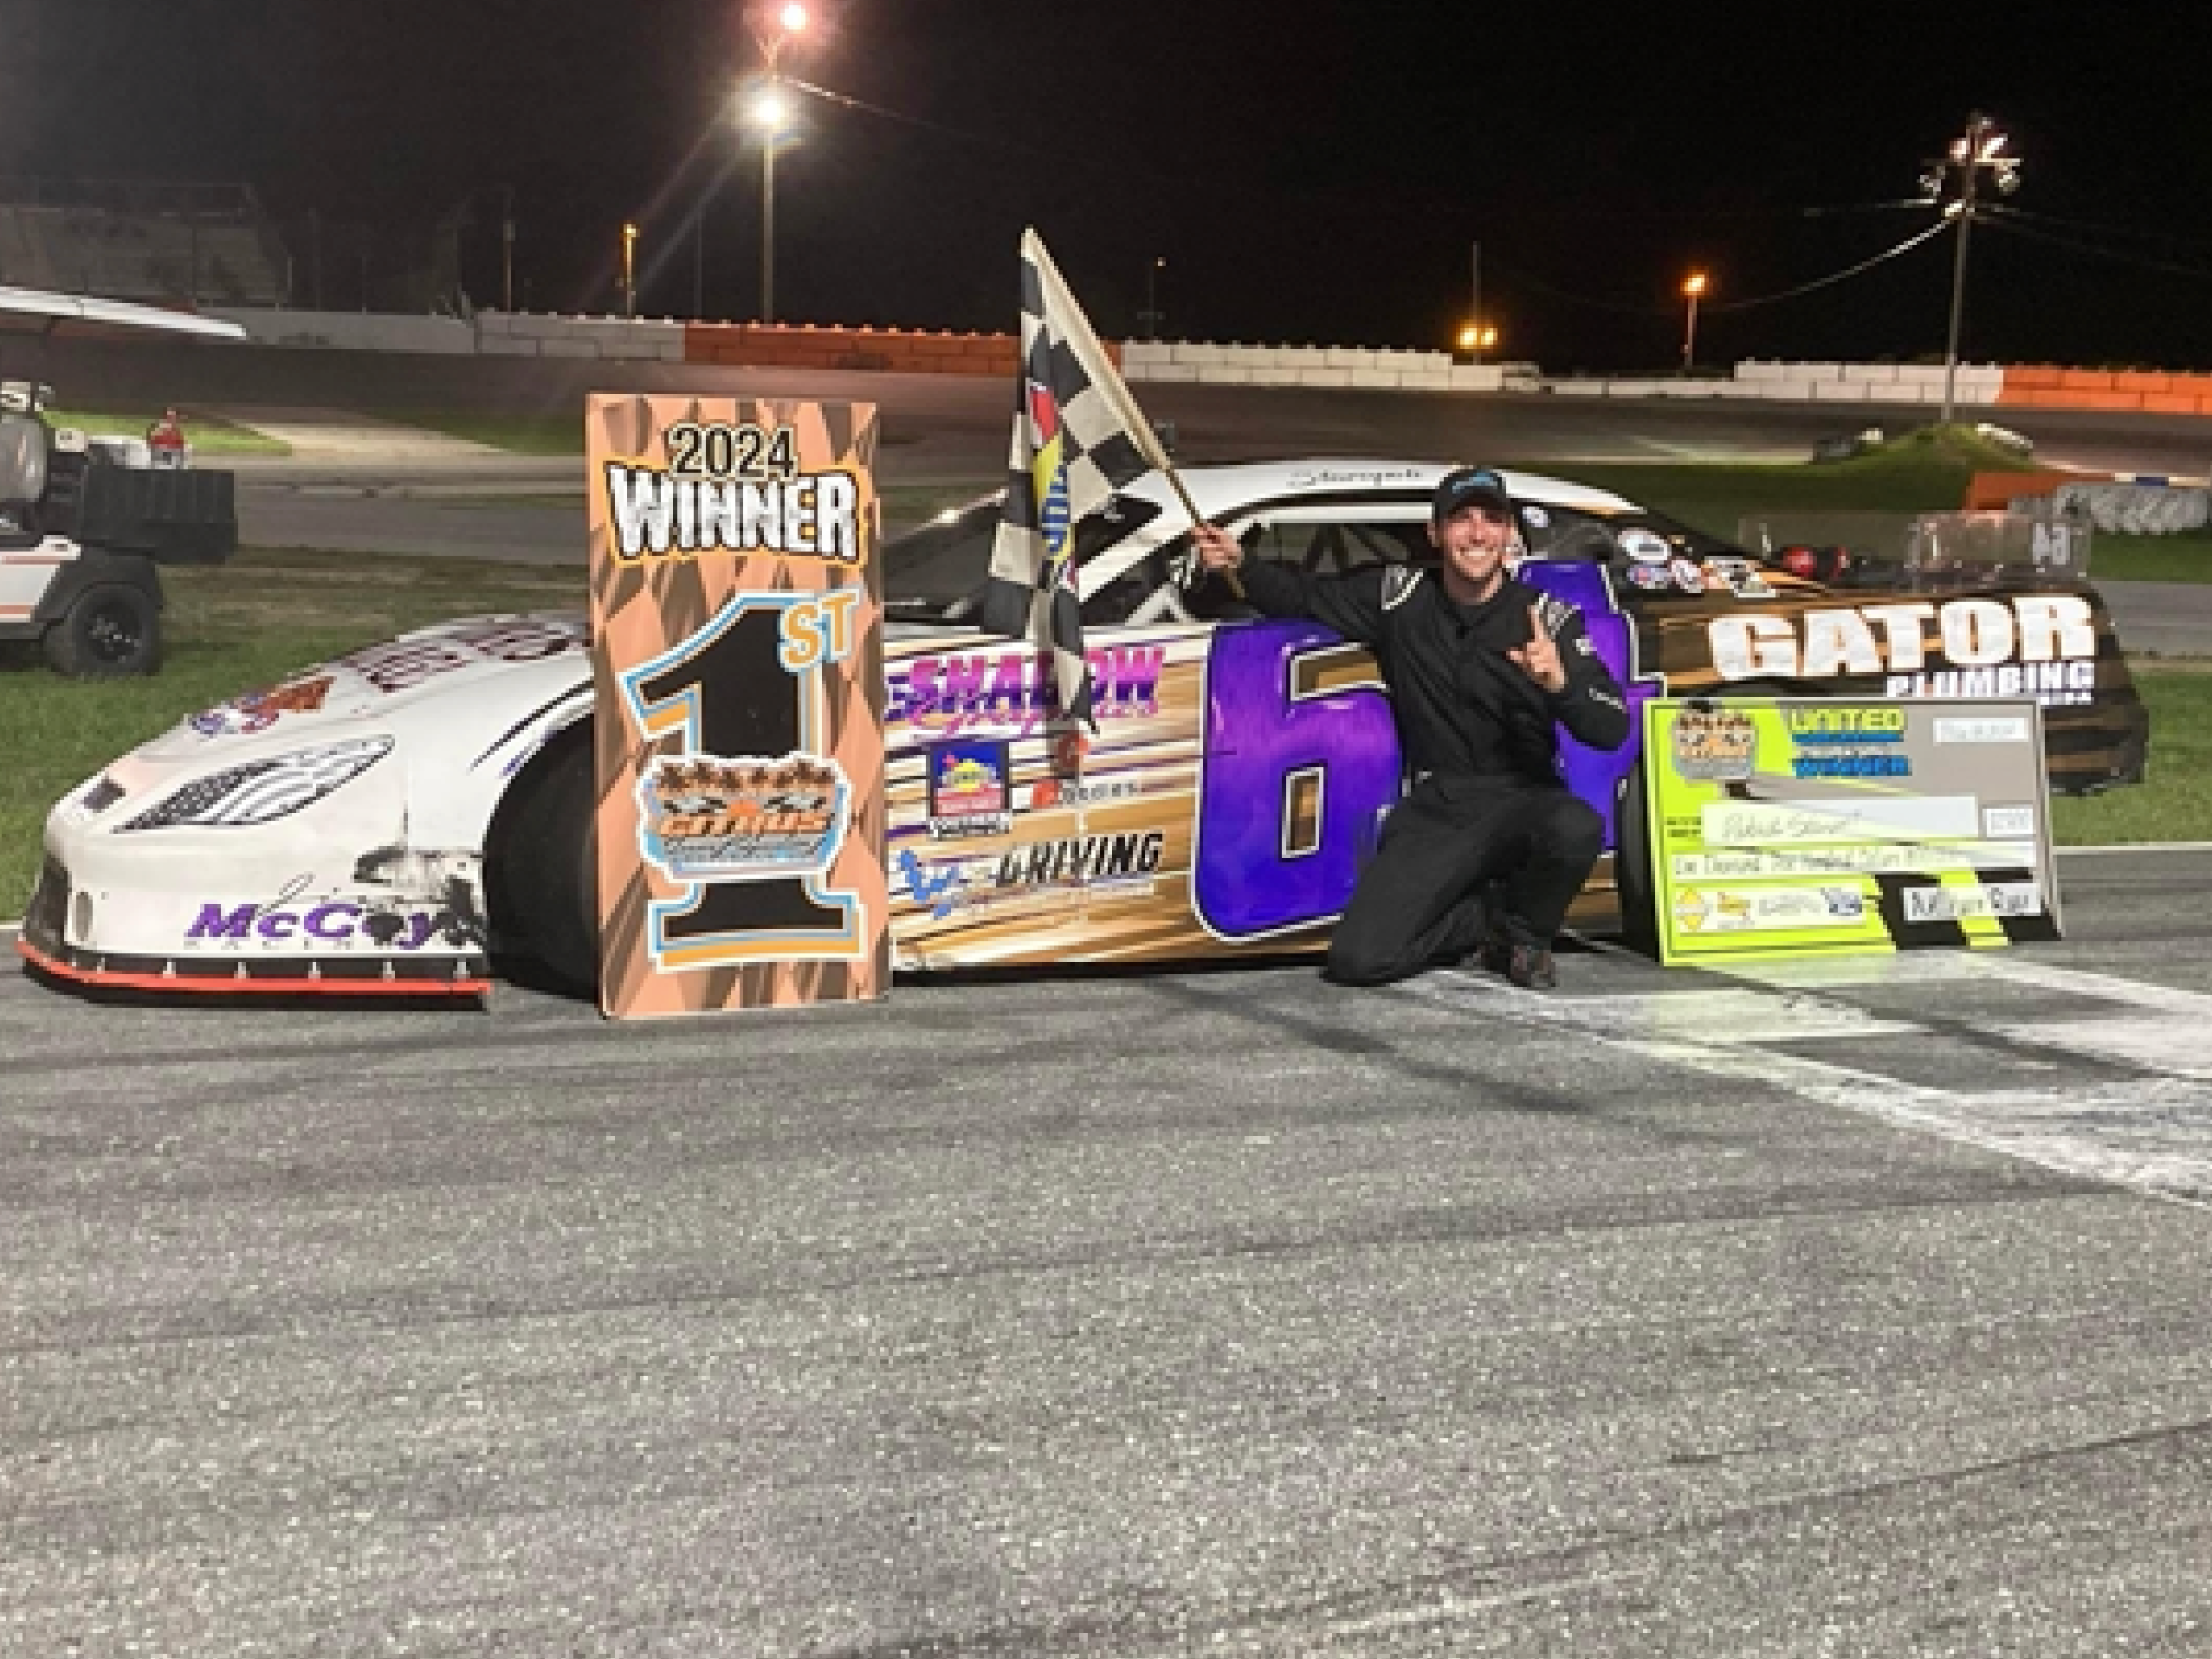 Patrick Staropoli, a retina specialist with Retina Consultants of Texas, took the checkered flag May 18 in the Sunoco Challenge Series race at Citrus County Speedway at Citrus County, Florida. (Image credit: Patrick Staropoli)